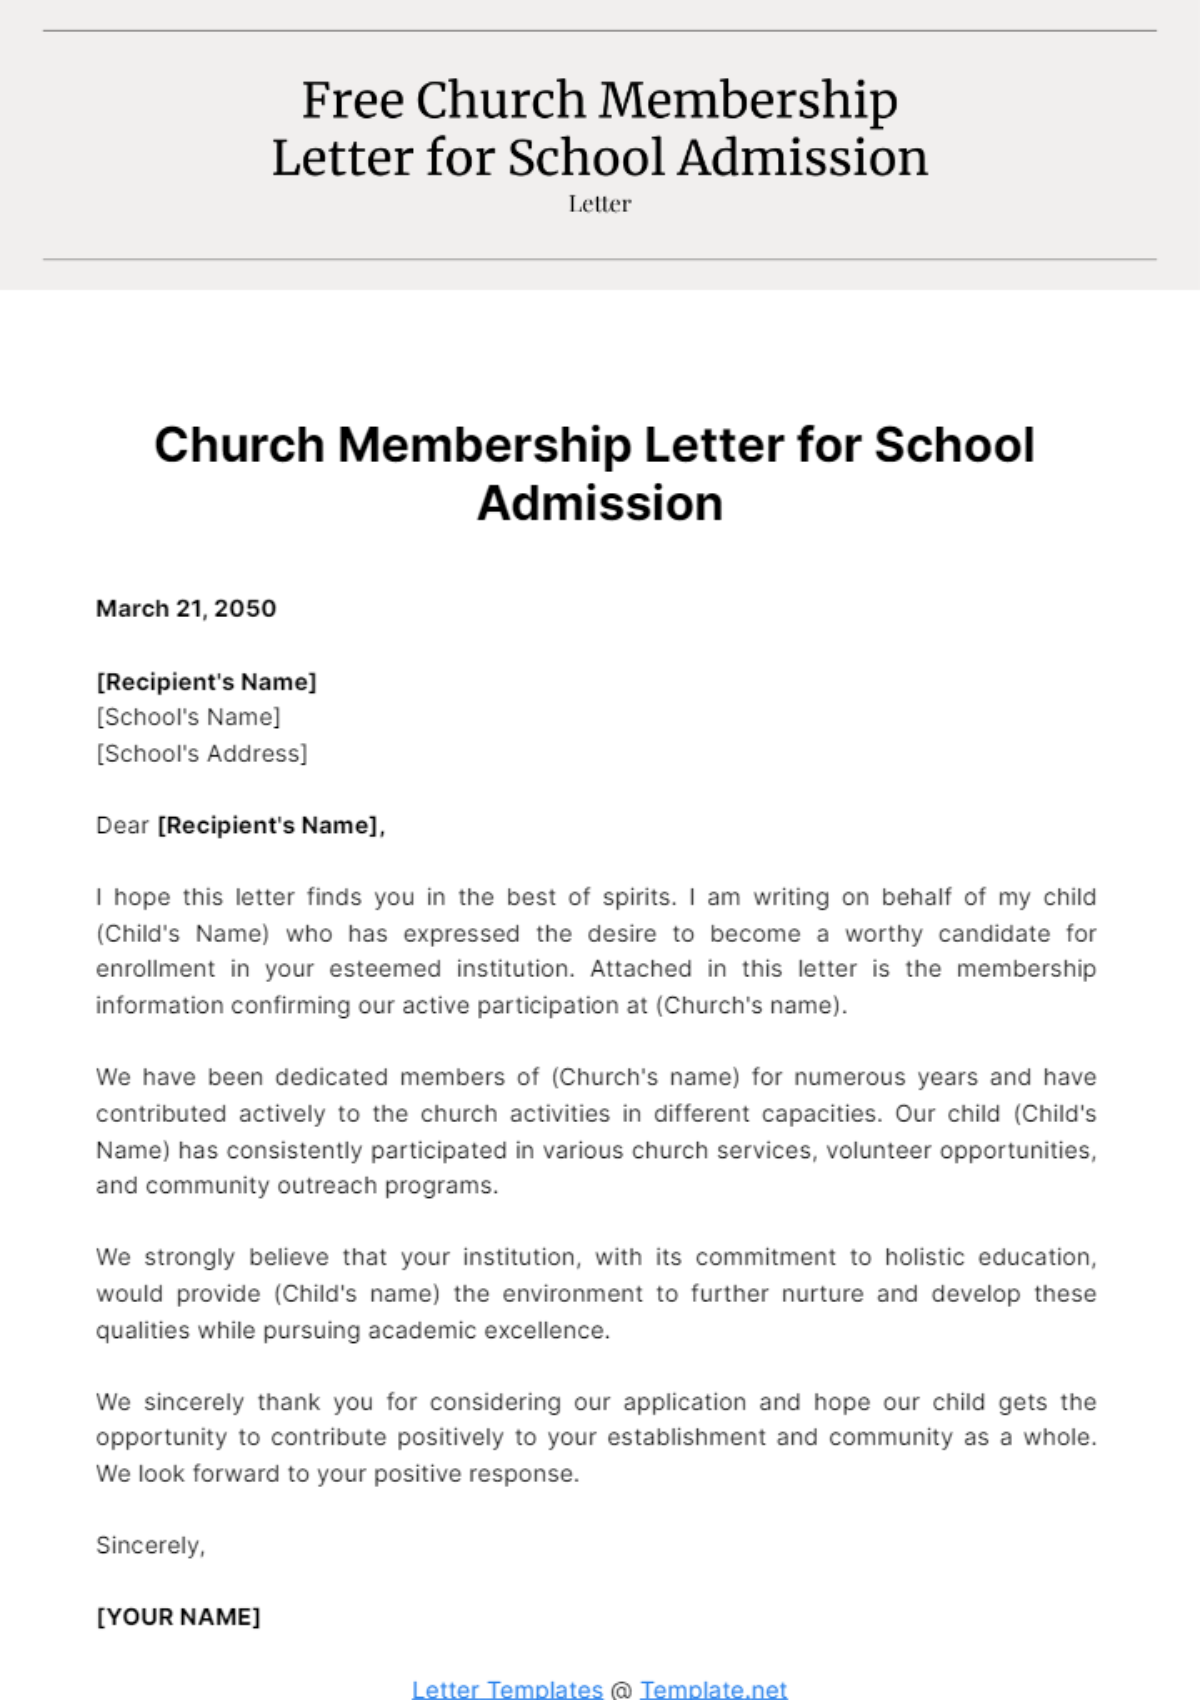 Free Church Membership Letter for School Admission Template